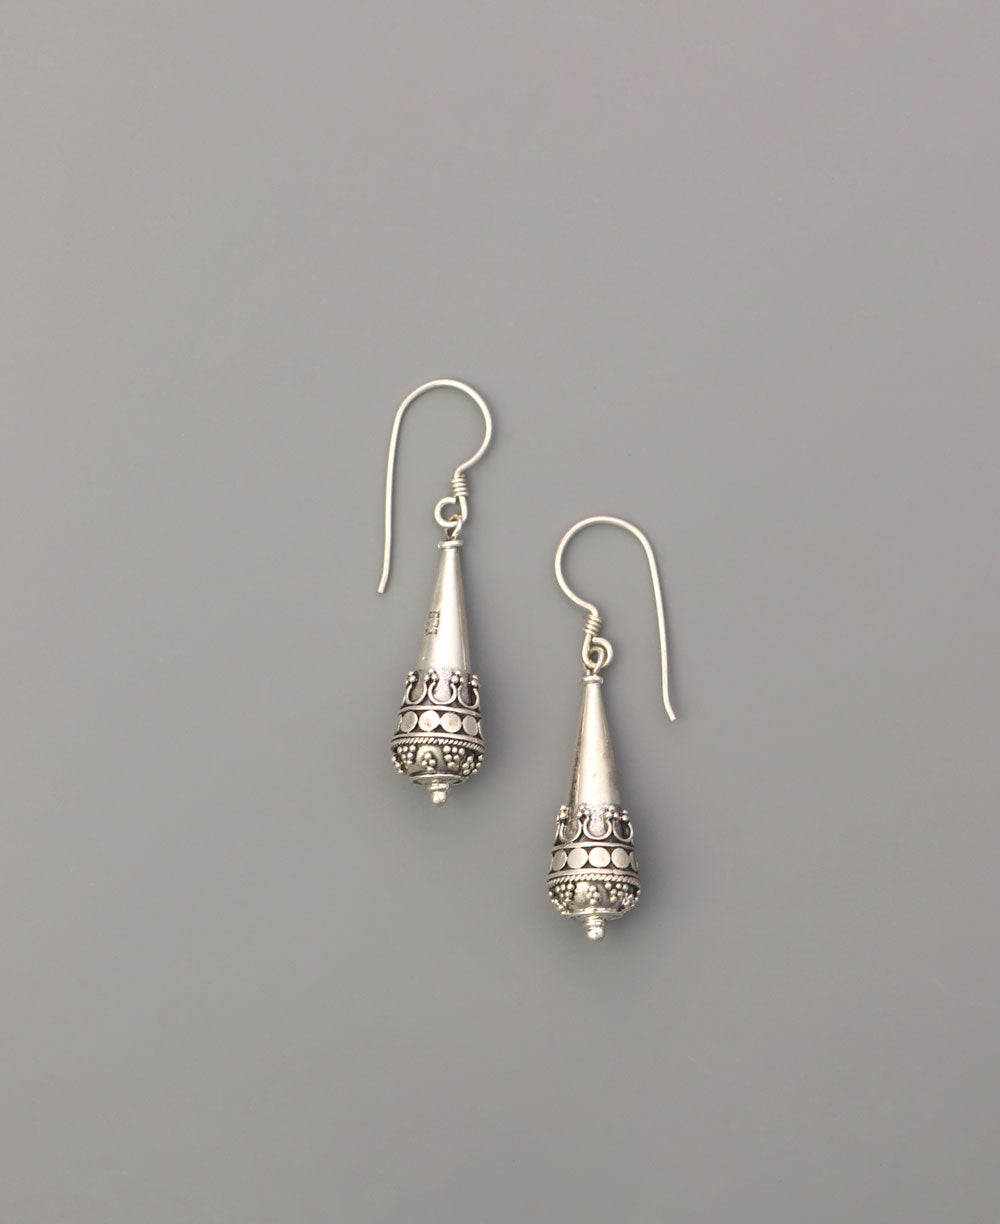 Bohemian style sterling silver conical earrings